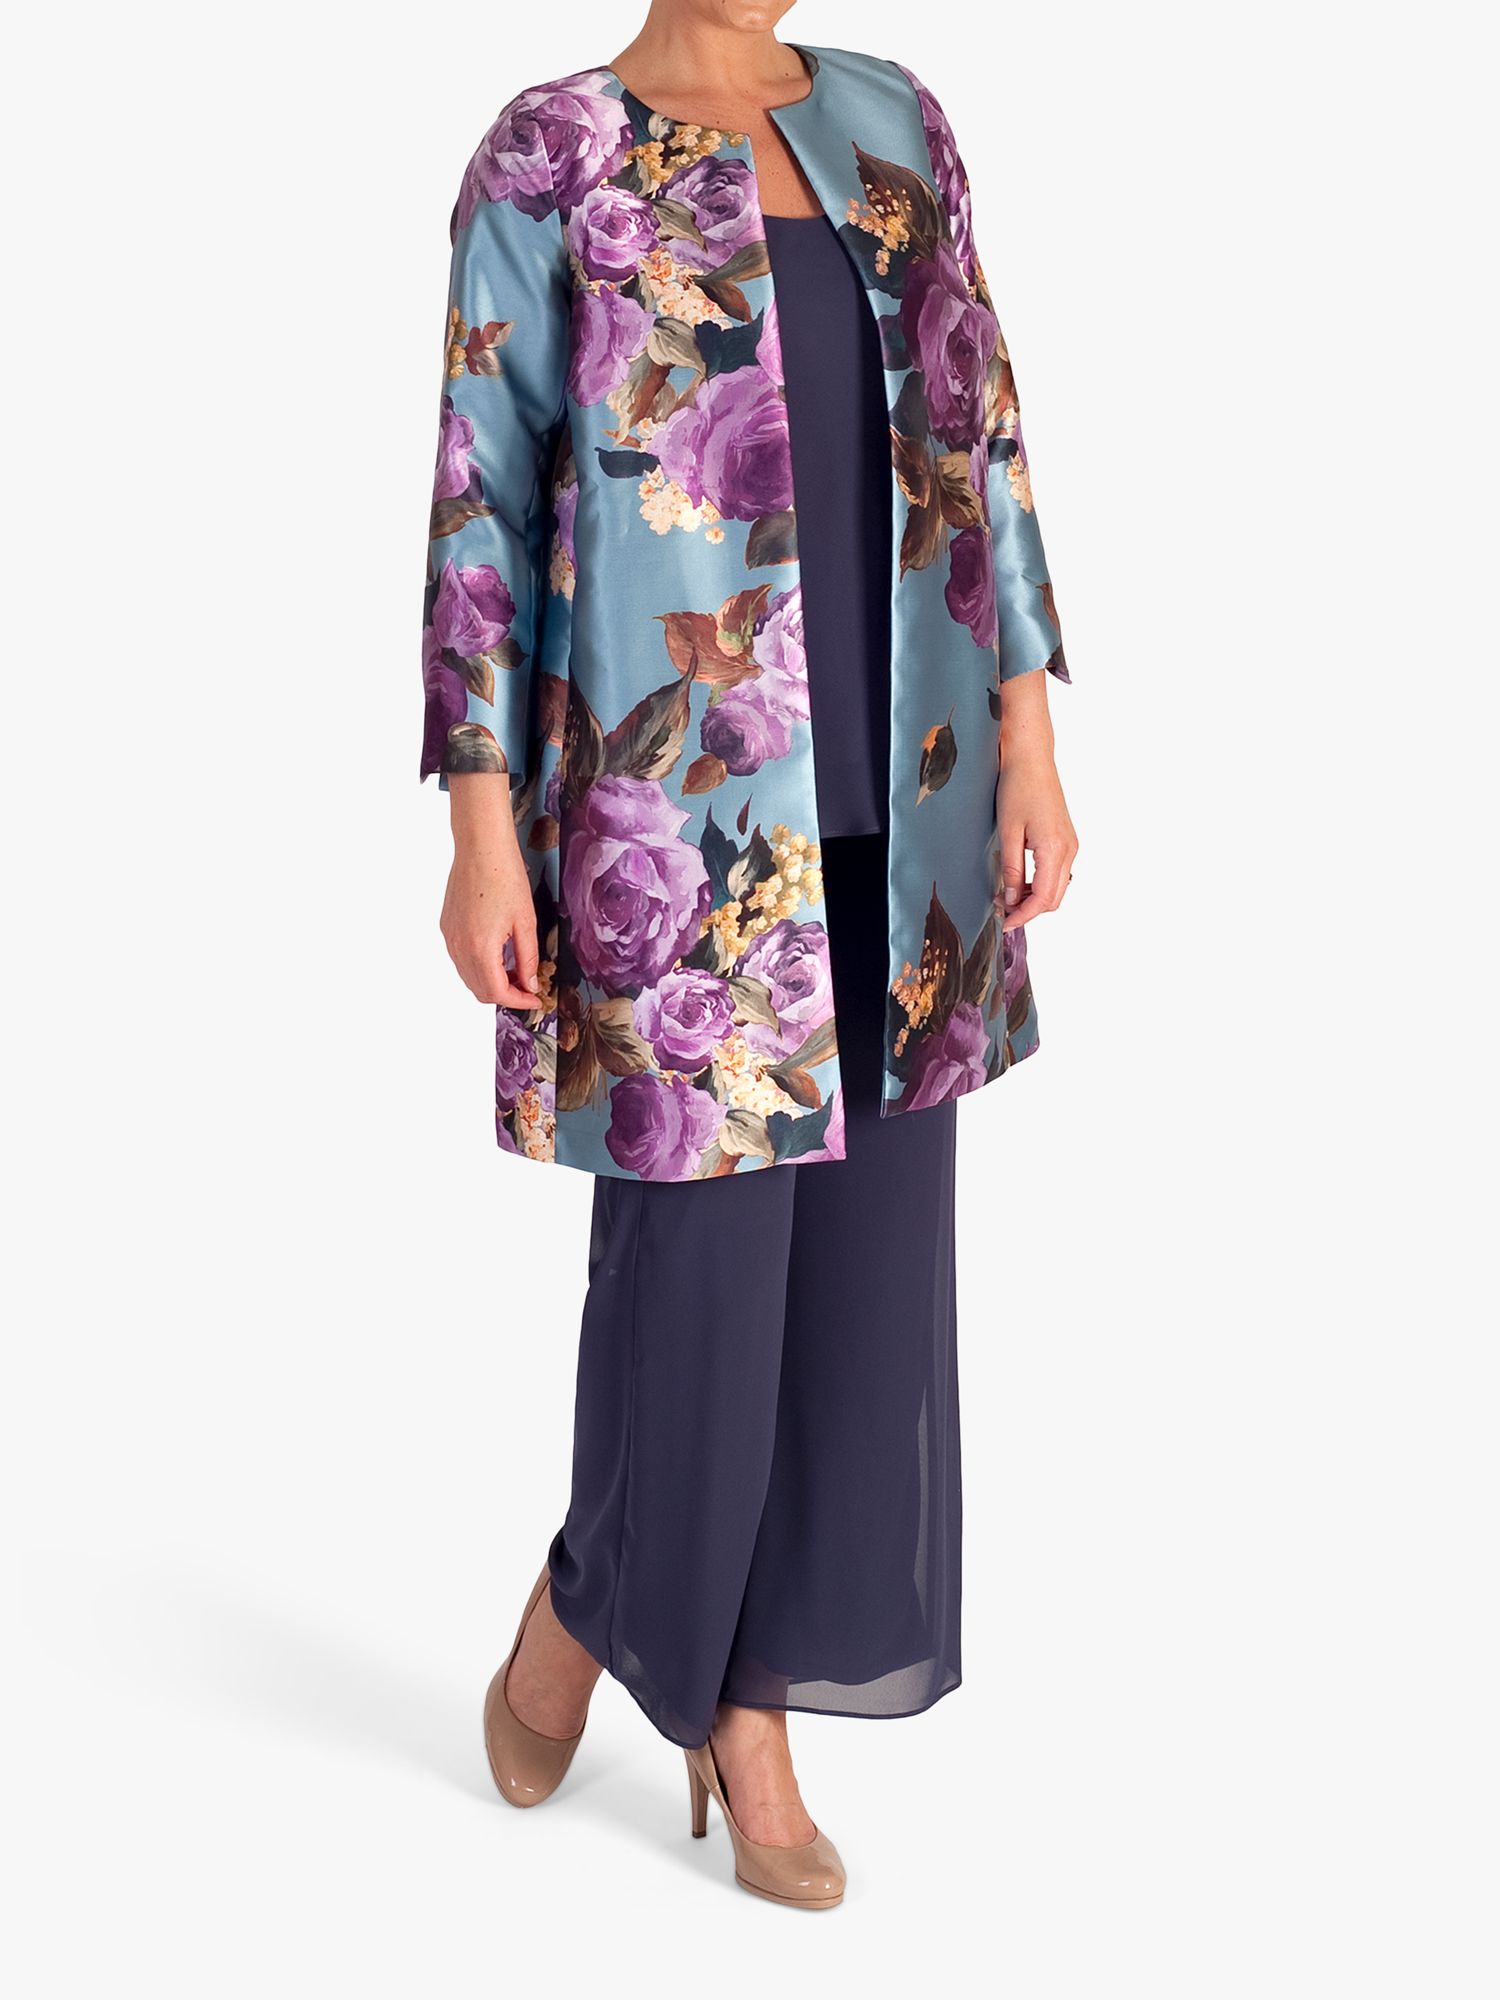 chesca Floral Satin Twill Coat, Blue Steel/Magenta at John Lewis & Partners